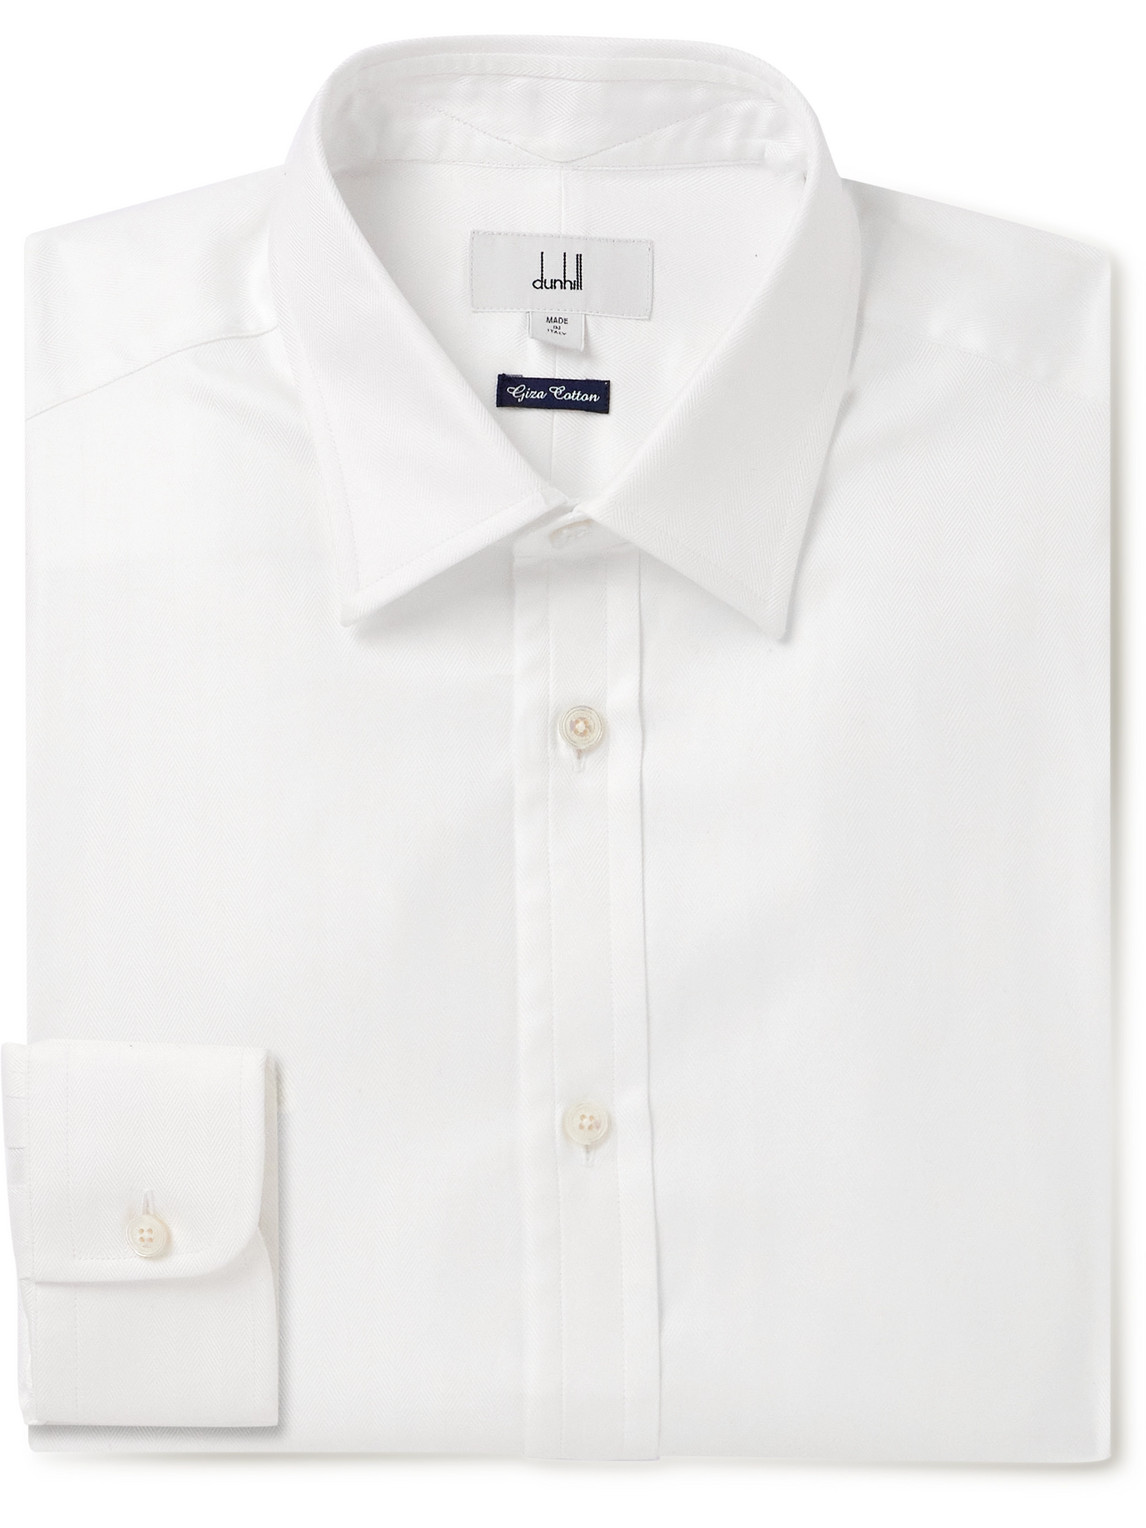 Dunhill Giza Cotton Evening Shirt In White